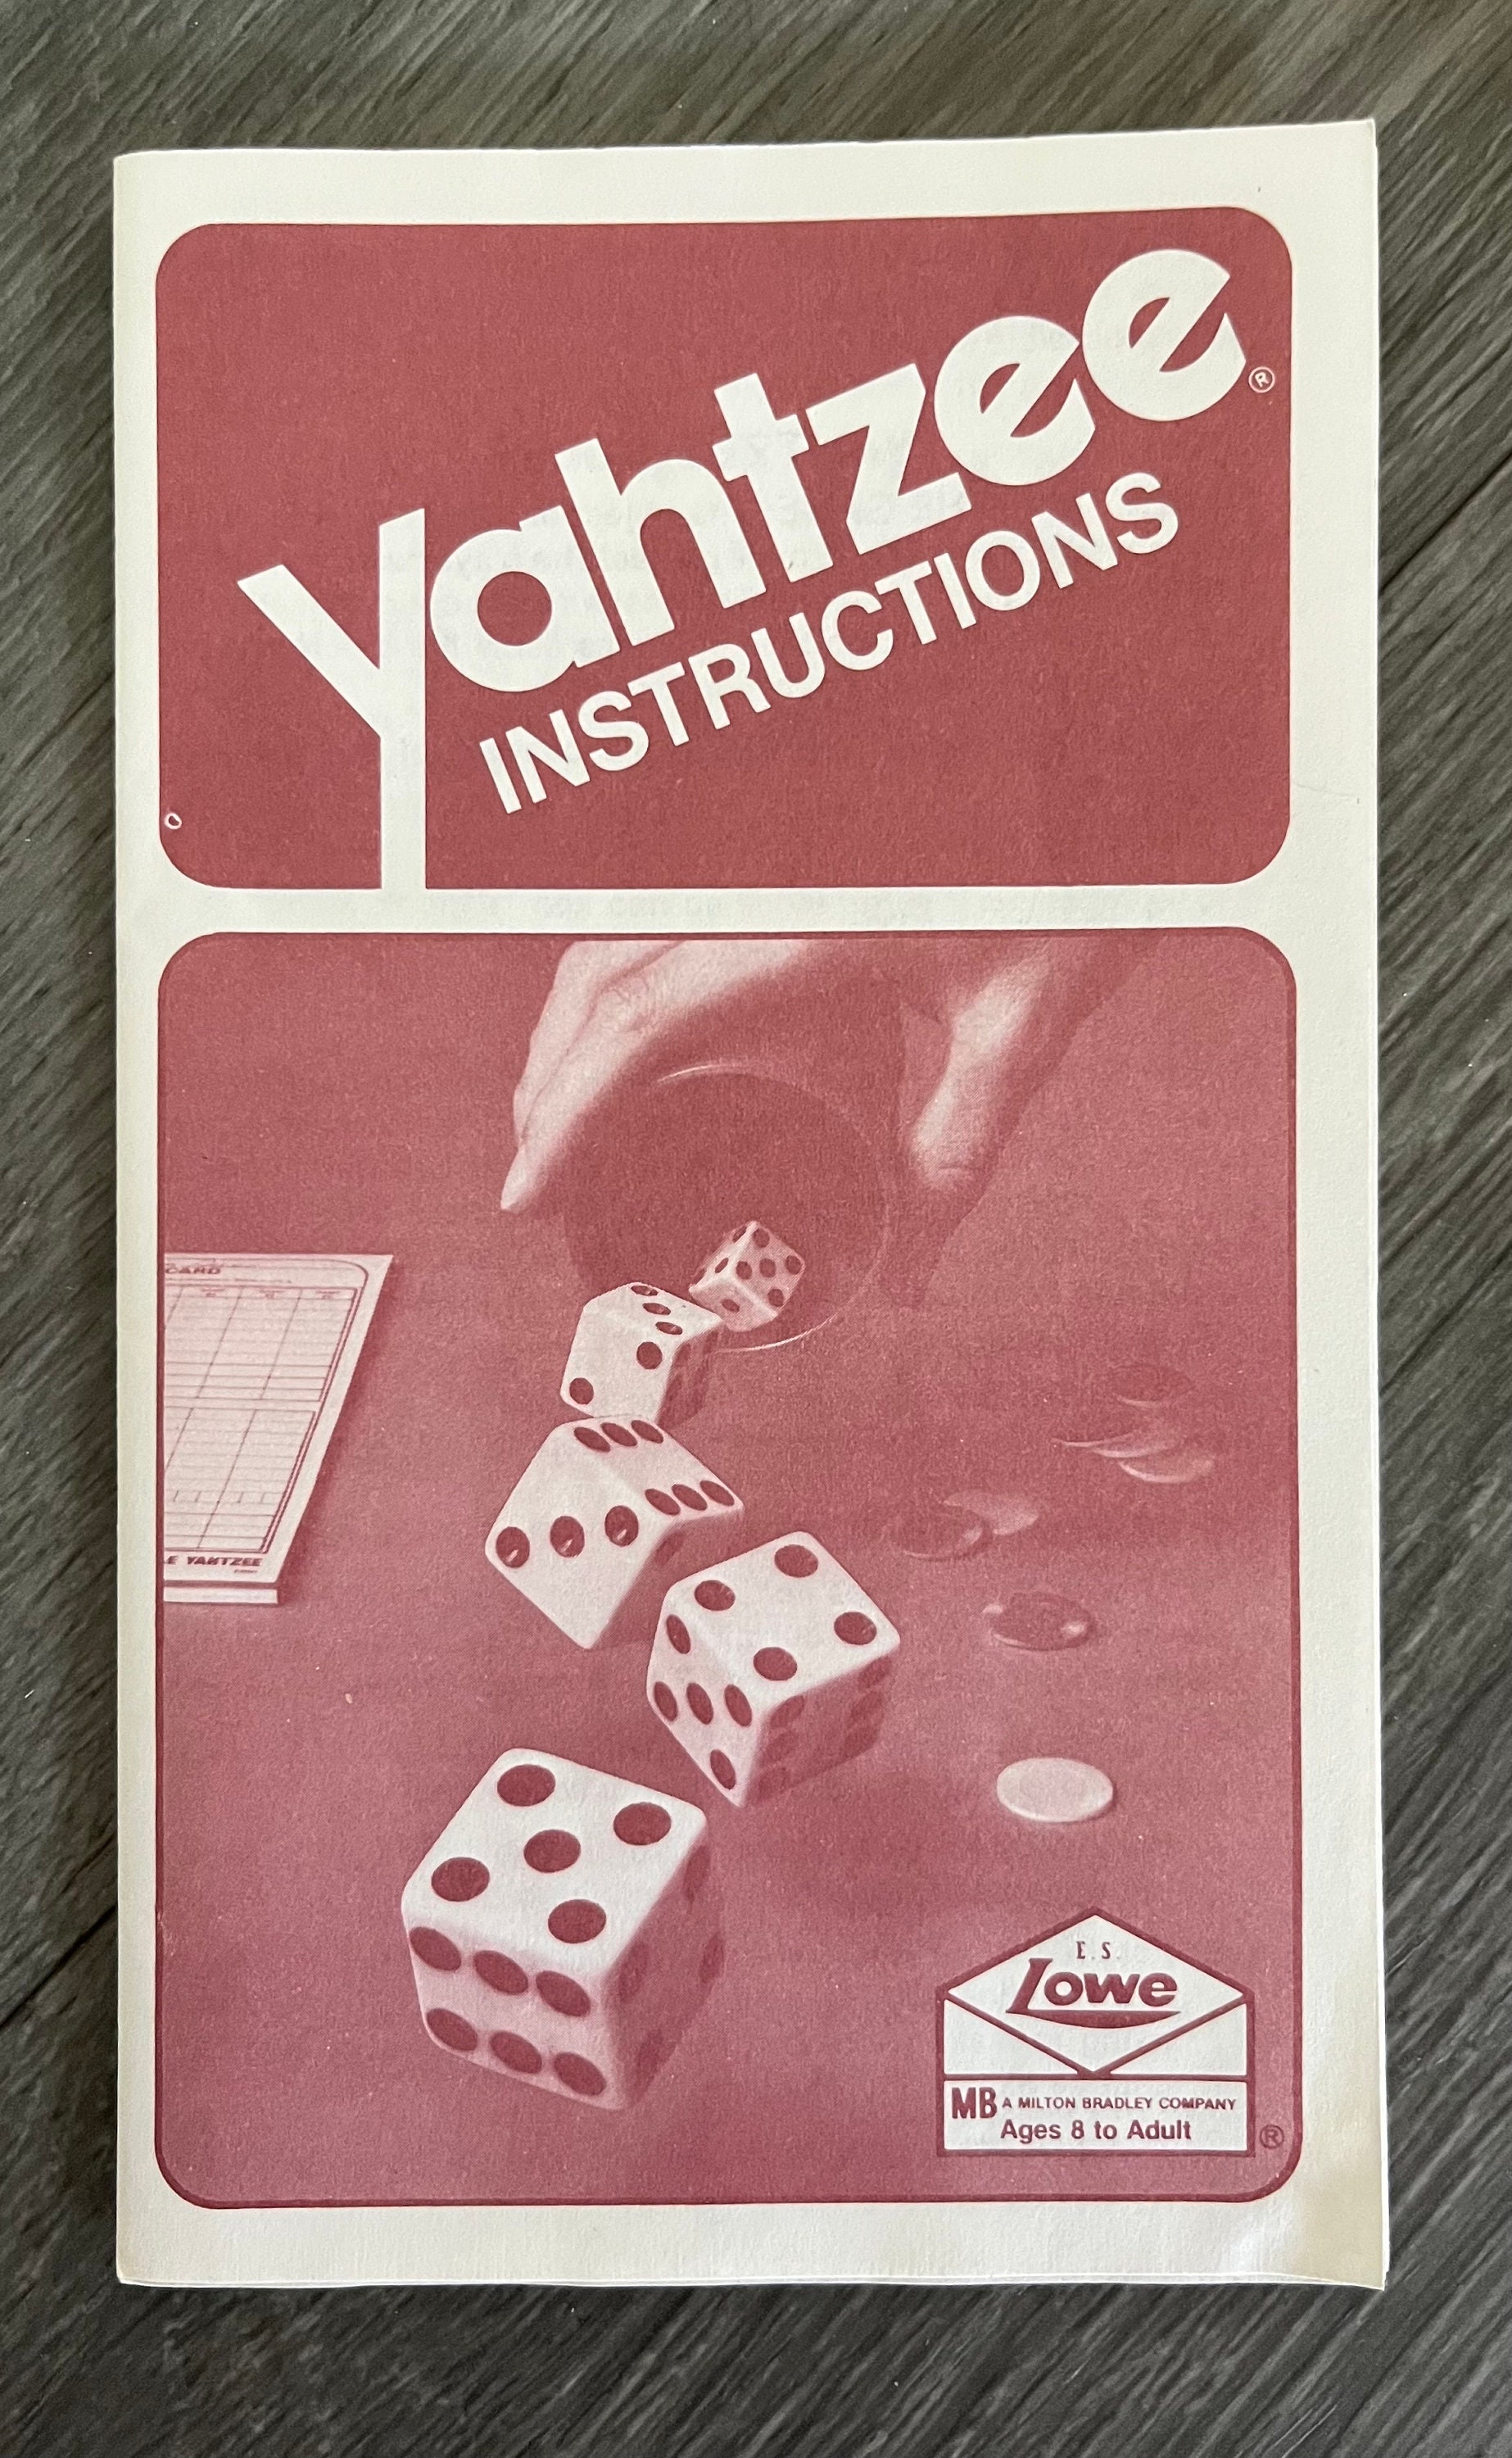 Vintage Yahtzee Board Game 1982 Milton Bradley Complete Family Game Night  Gift for Friend, Exciting Game of Skill and Chance, Dice Game 